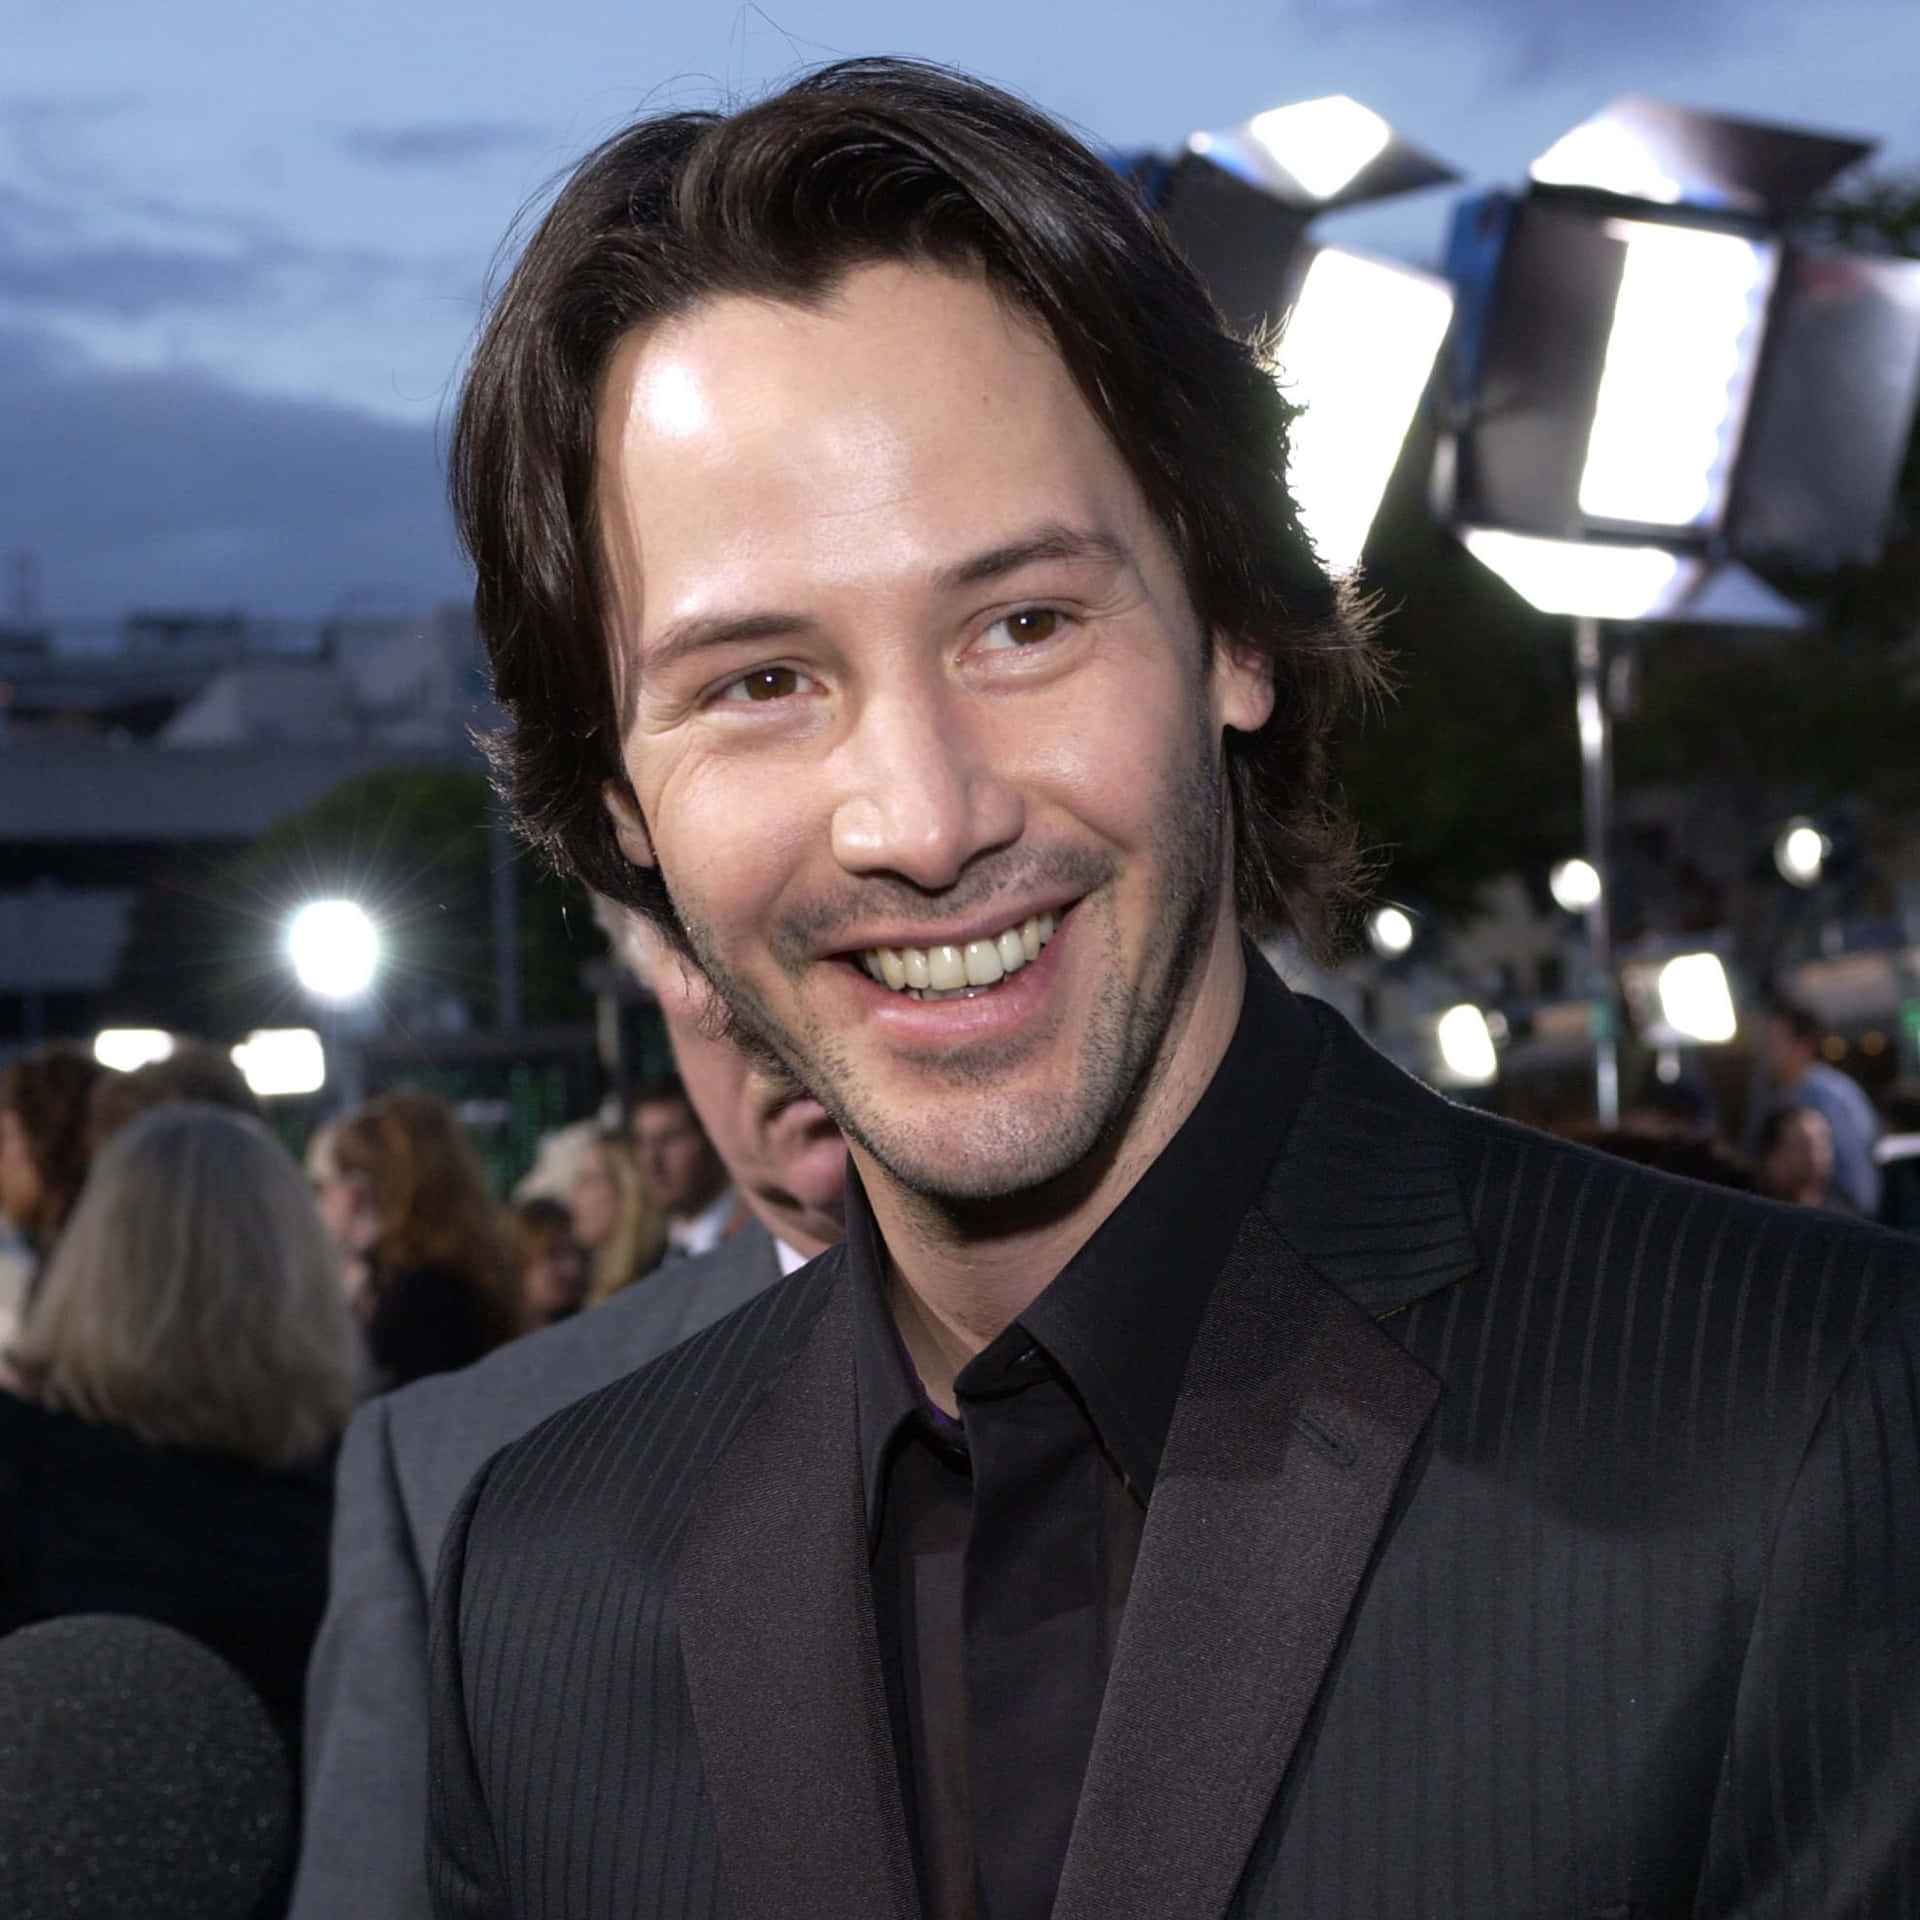 A Candid Shot Of Keanu Reeves